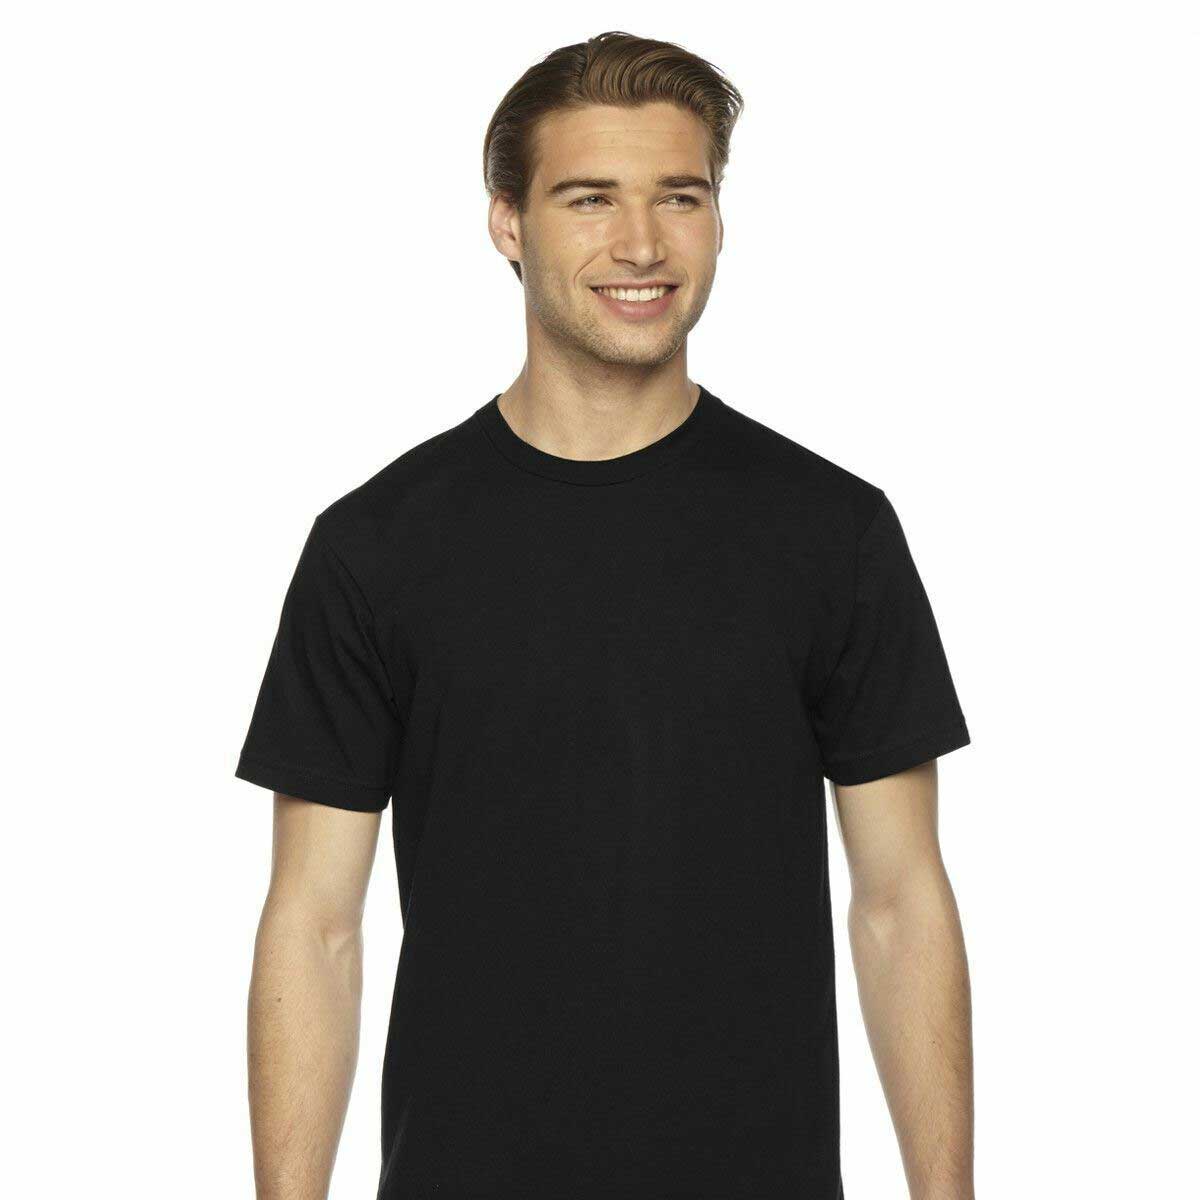 Wholesale Tee Shirts Manufacturers in Orsk